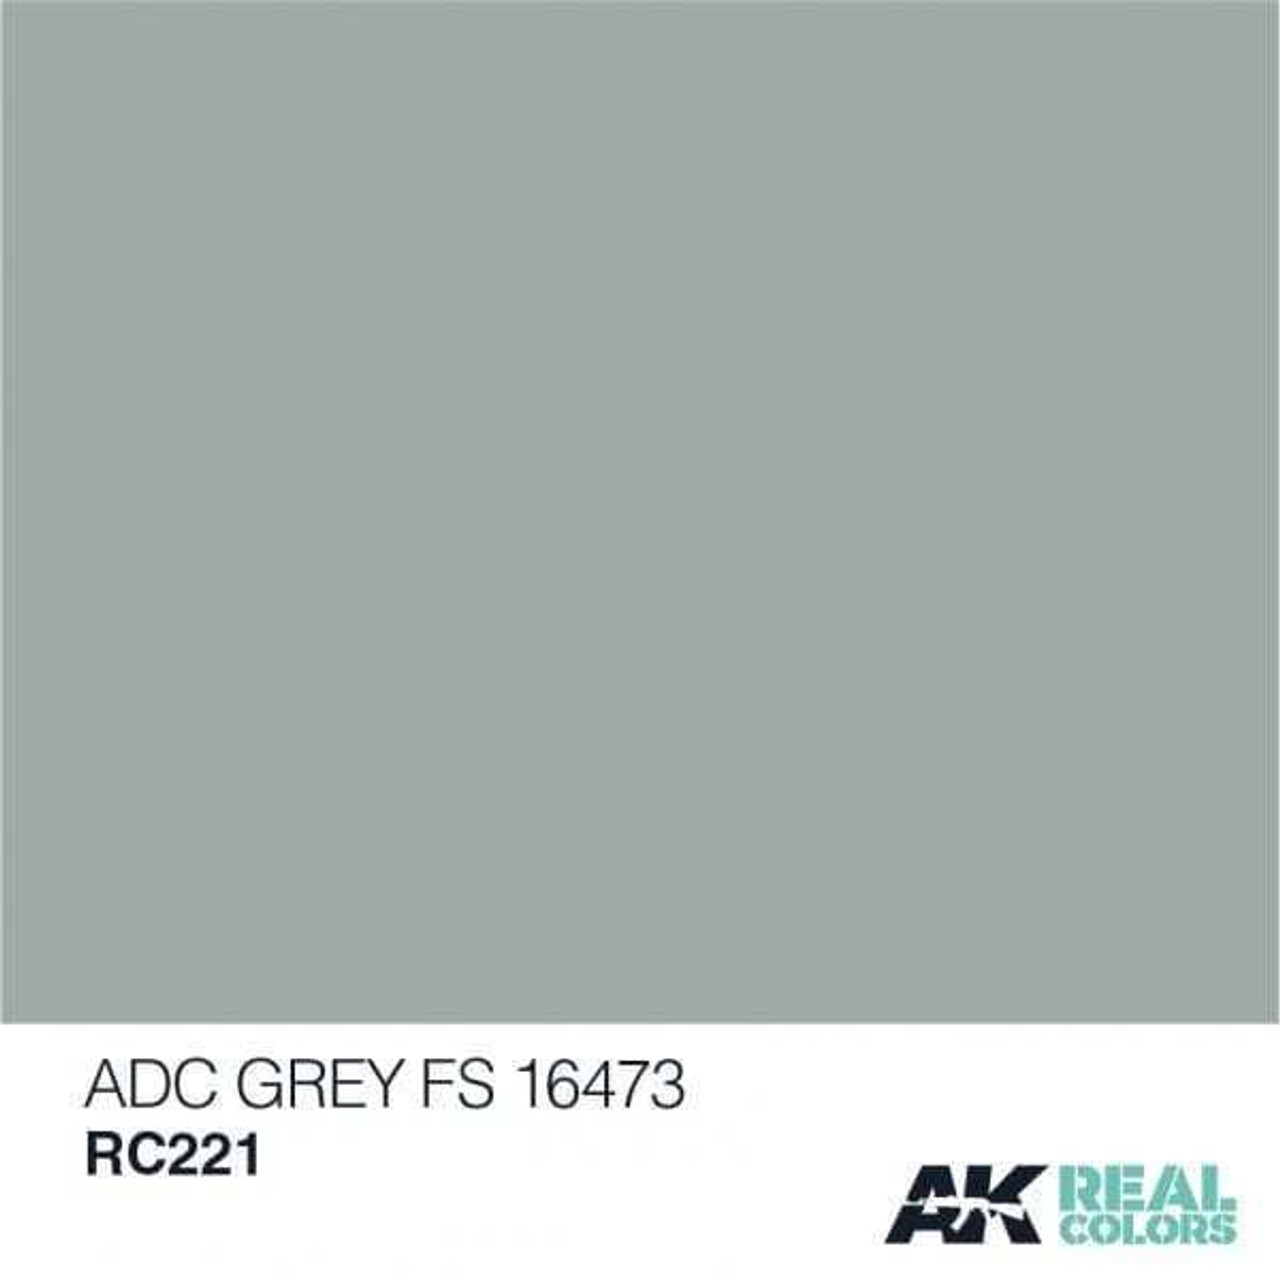 AKIRC221 Real Colors  ADC Grey FS 16473 Acrylic Lacquer Paint 10ml Bottle